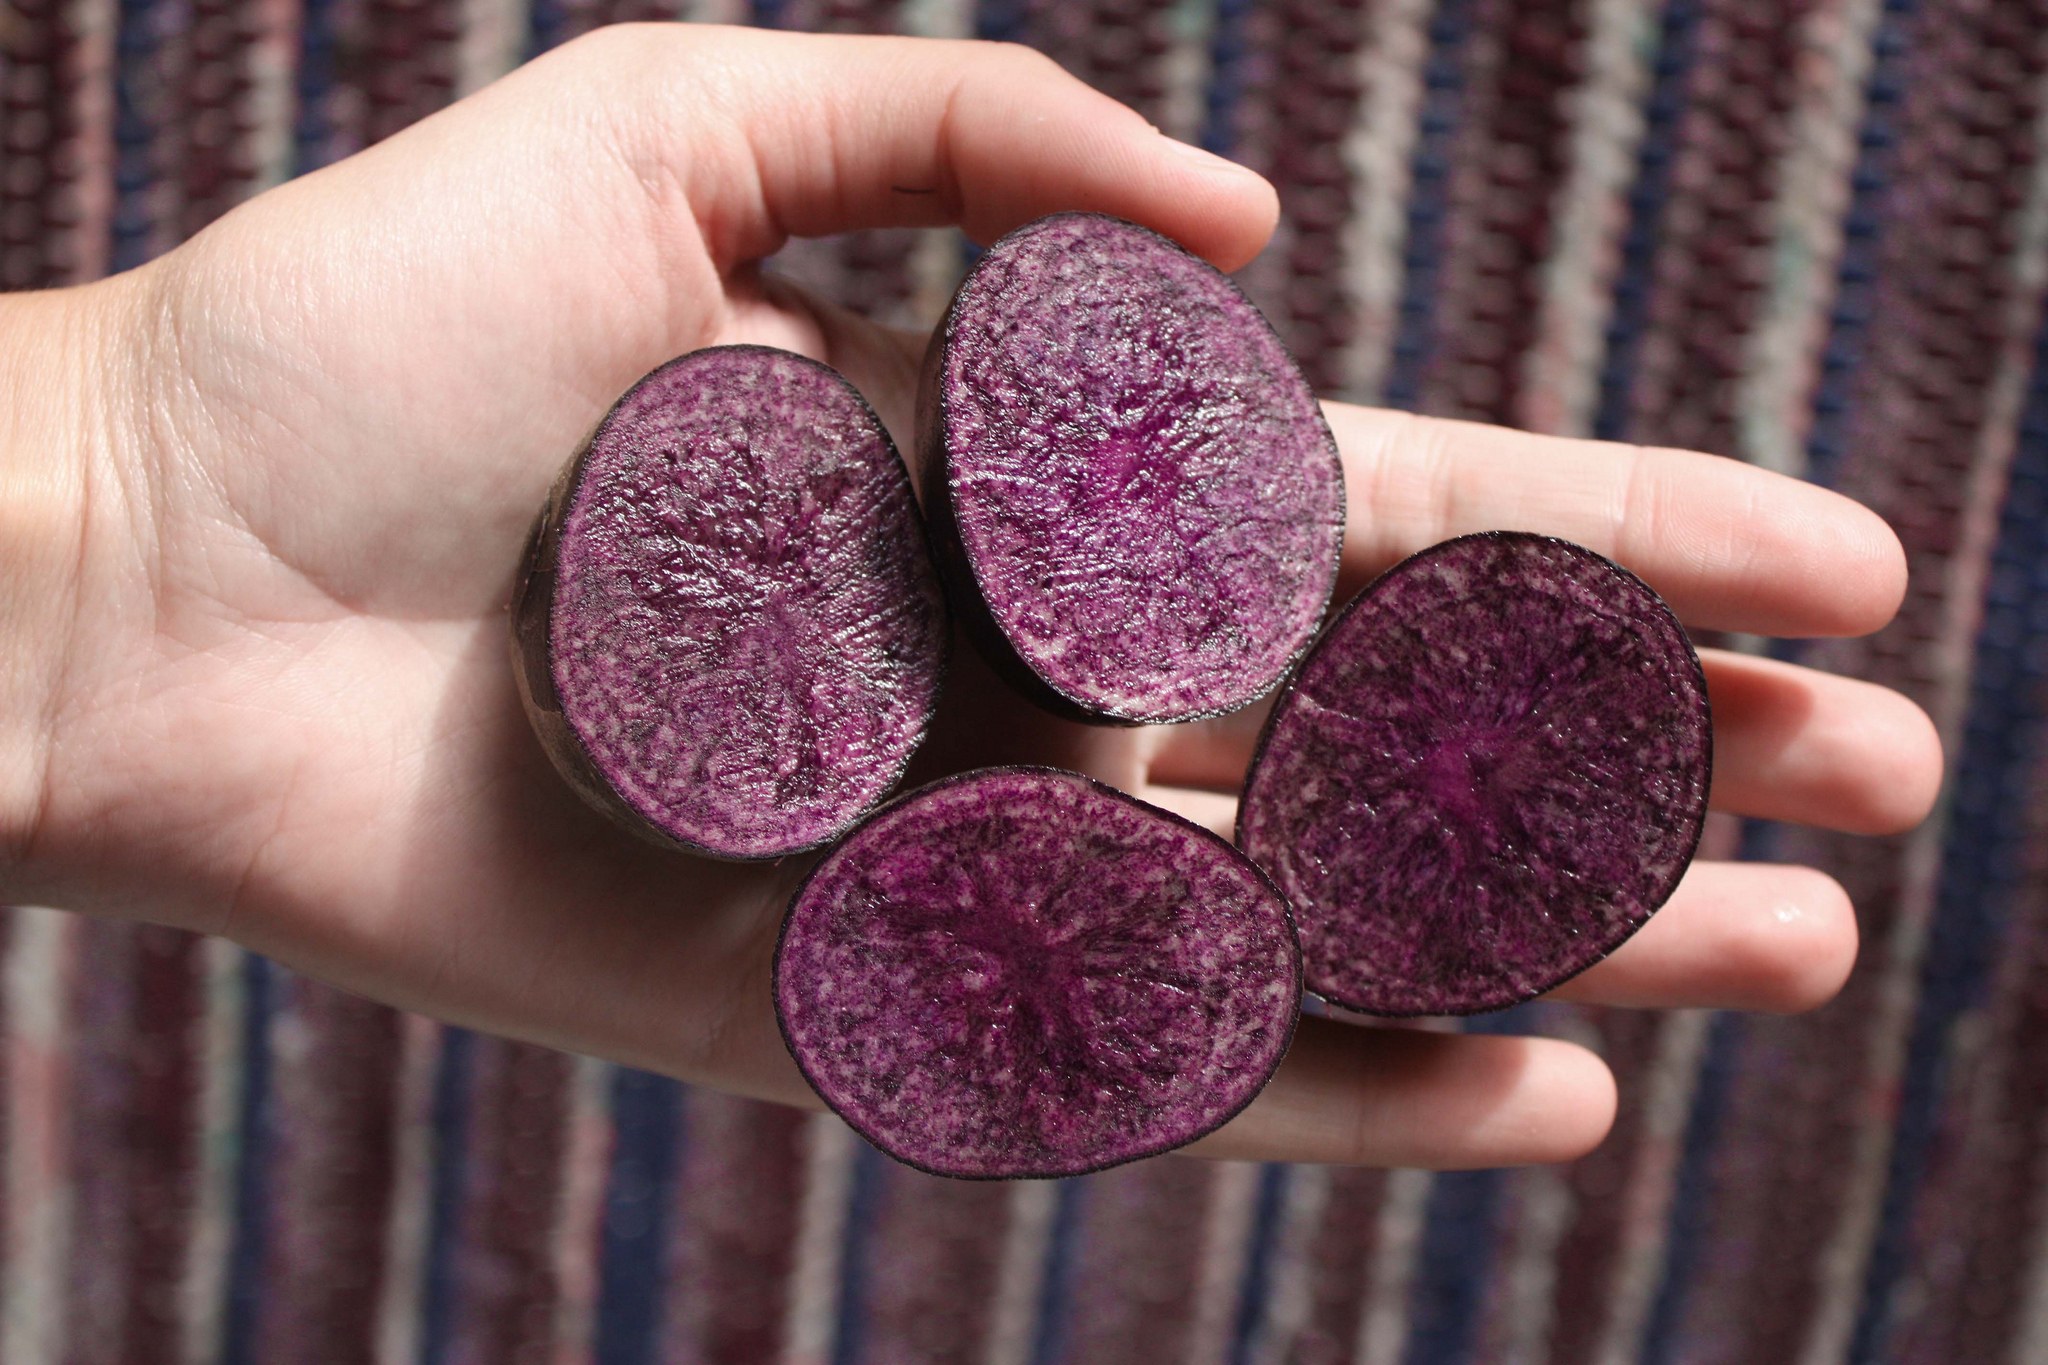 This Purple Food Has Been Found To Help Prevent Cancer